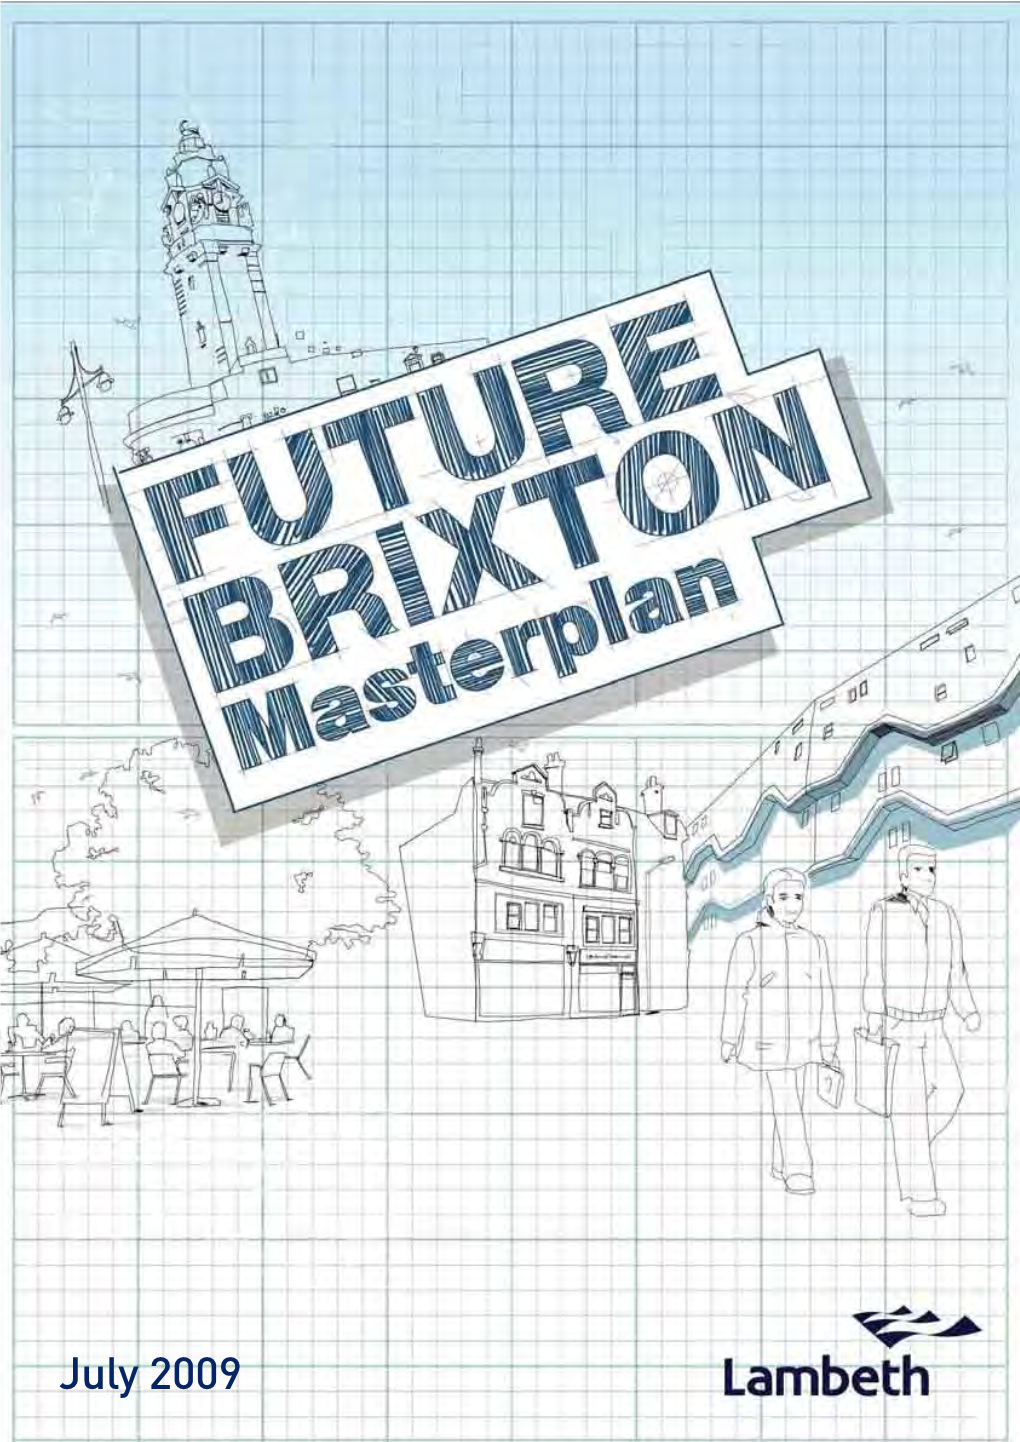 BRIXTON Masterplan Has Been Many Individuals and a Range of Diverse Commissioned by the London Borough of Lambeth